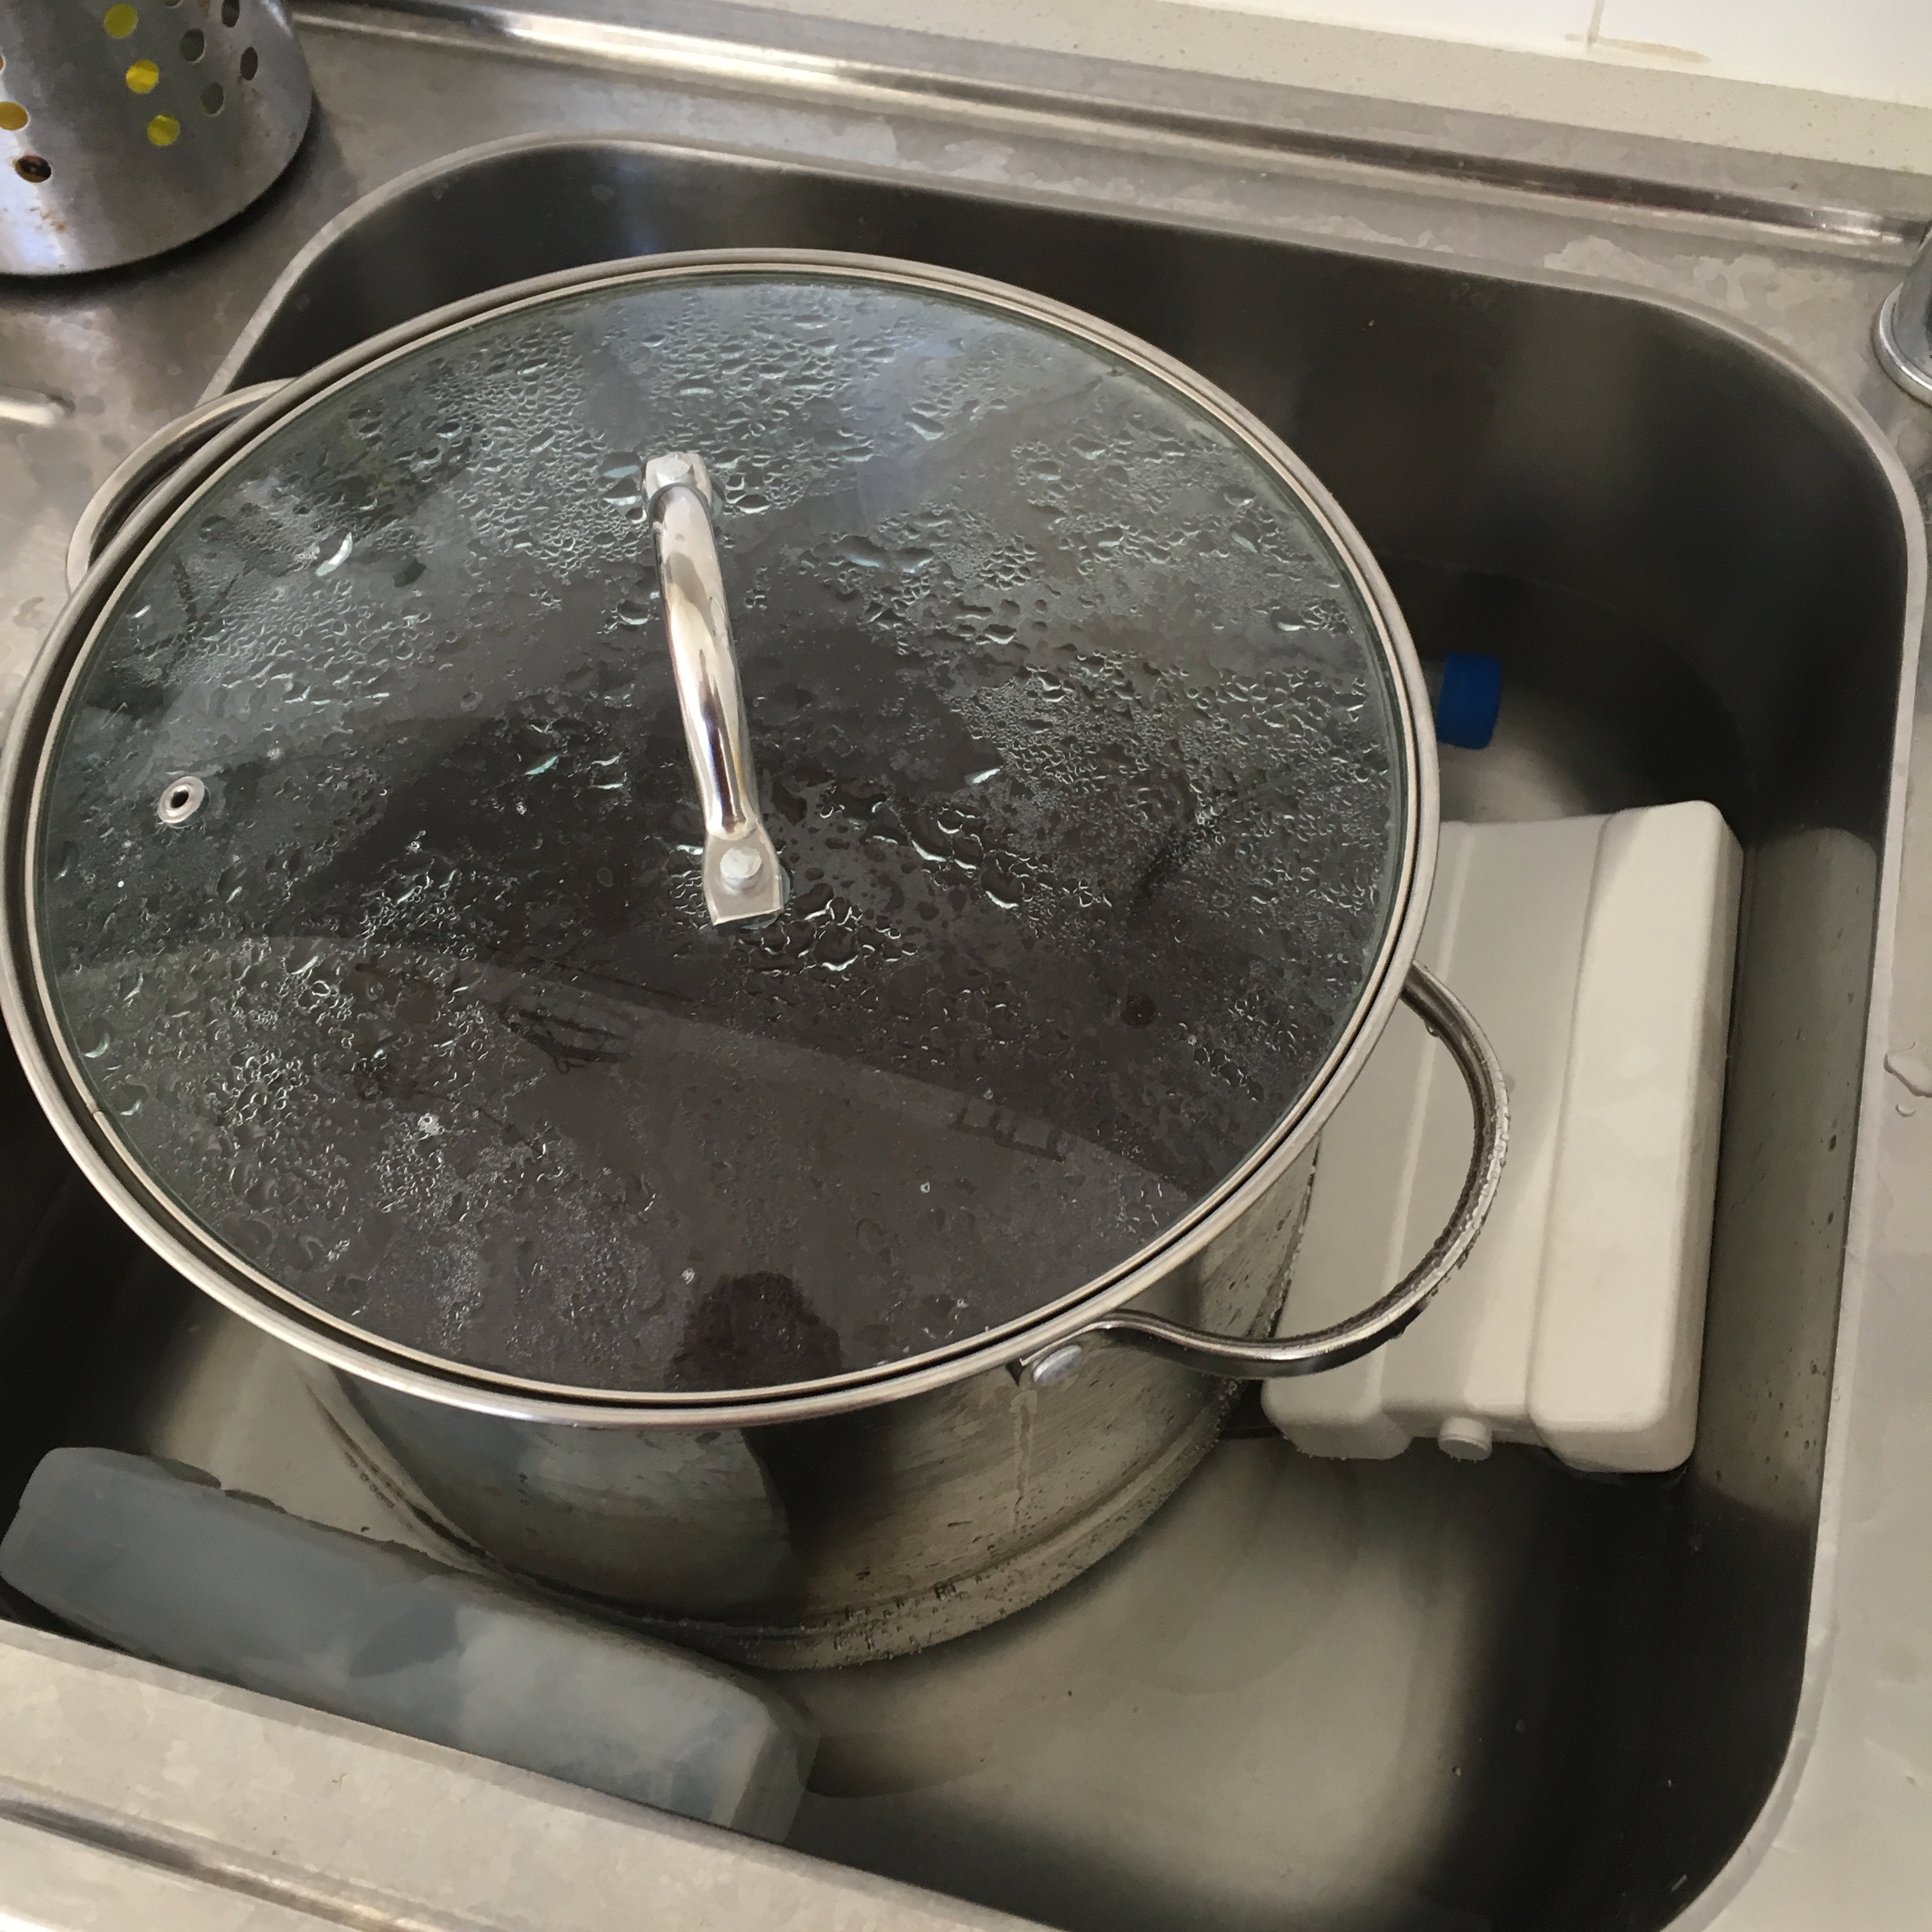 Put the pot in the sink to cool off. This can often take a few hours unless a lot of ice is added